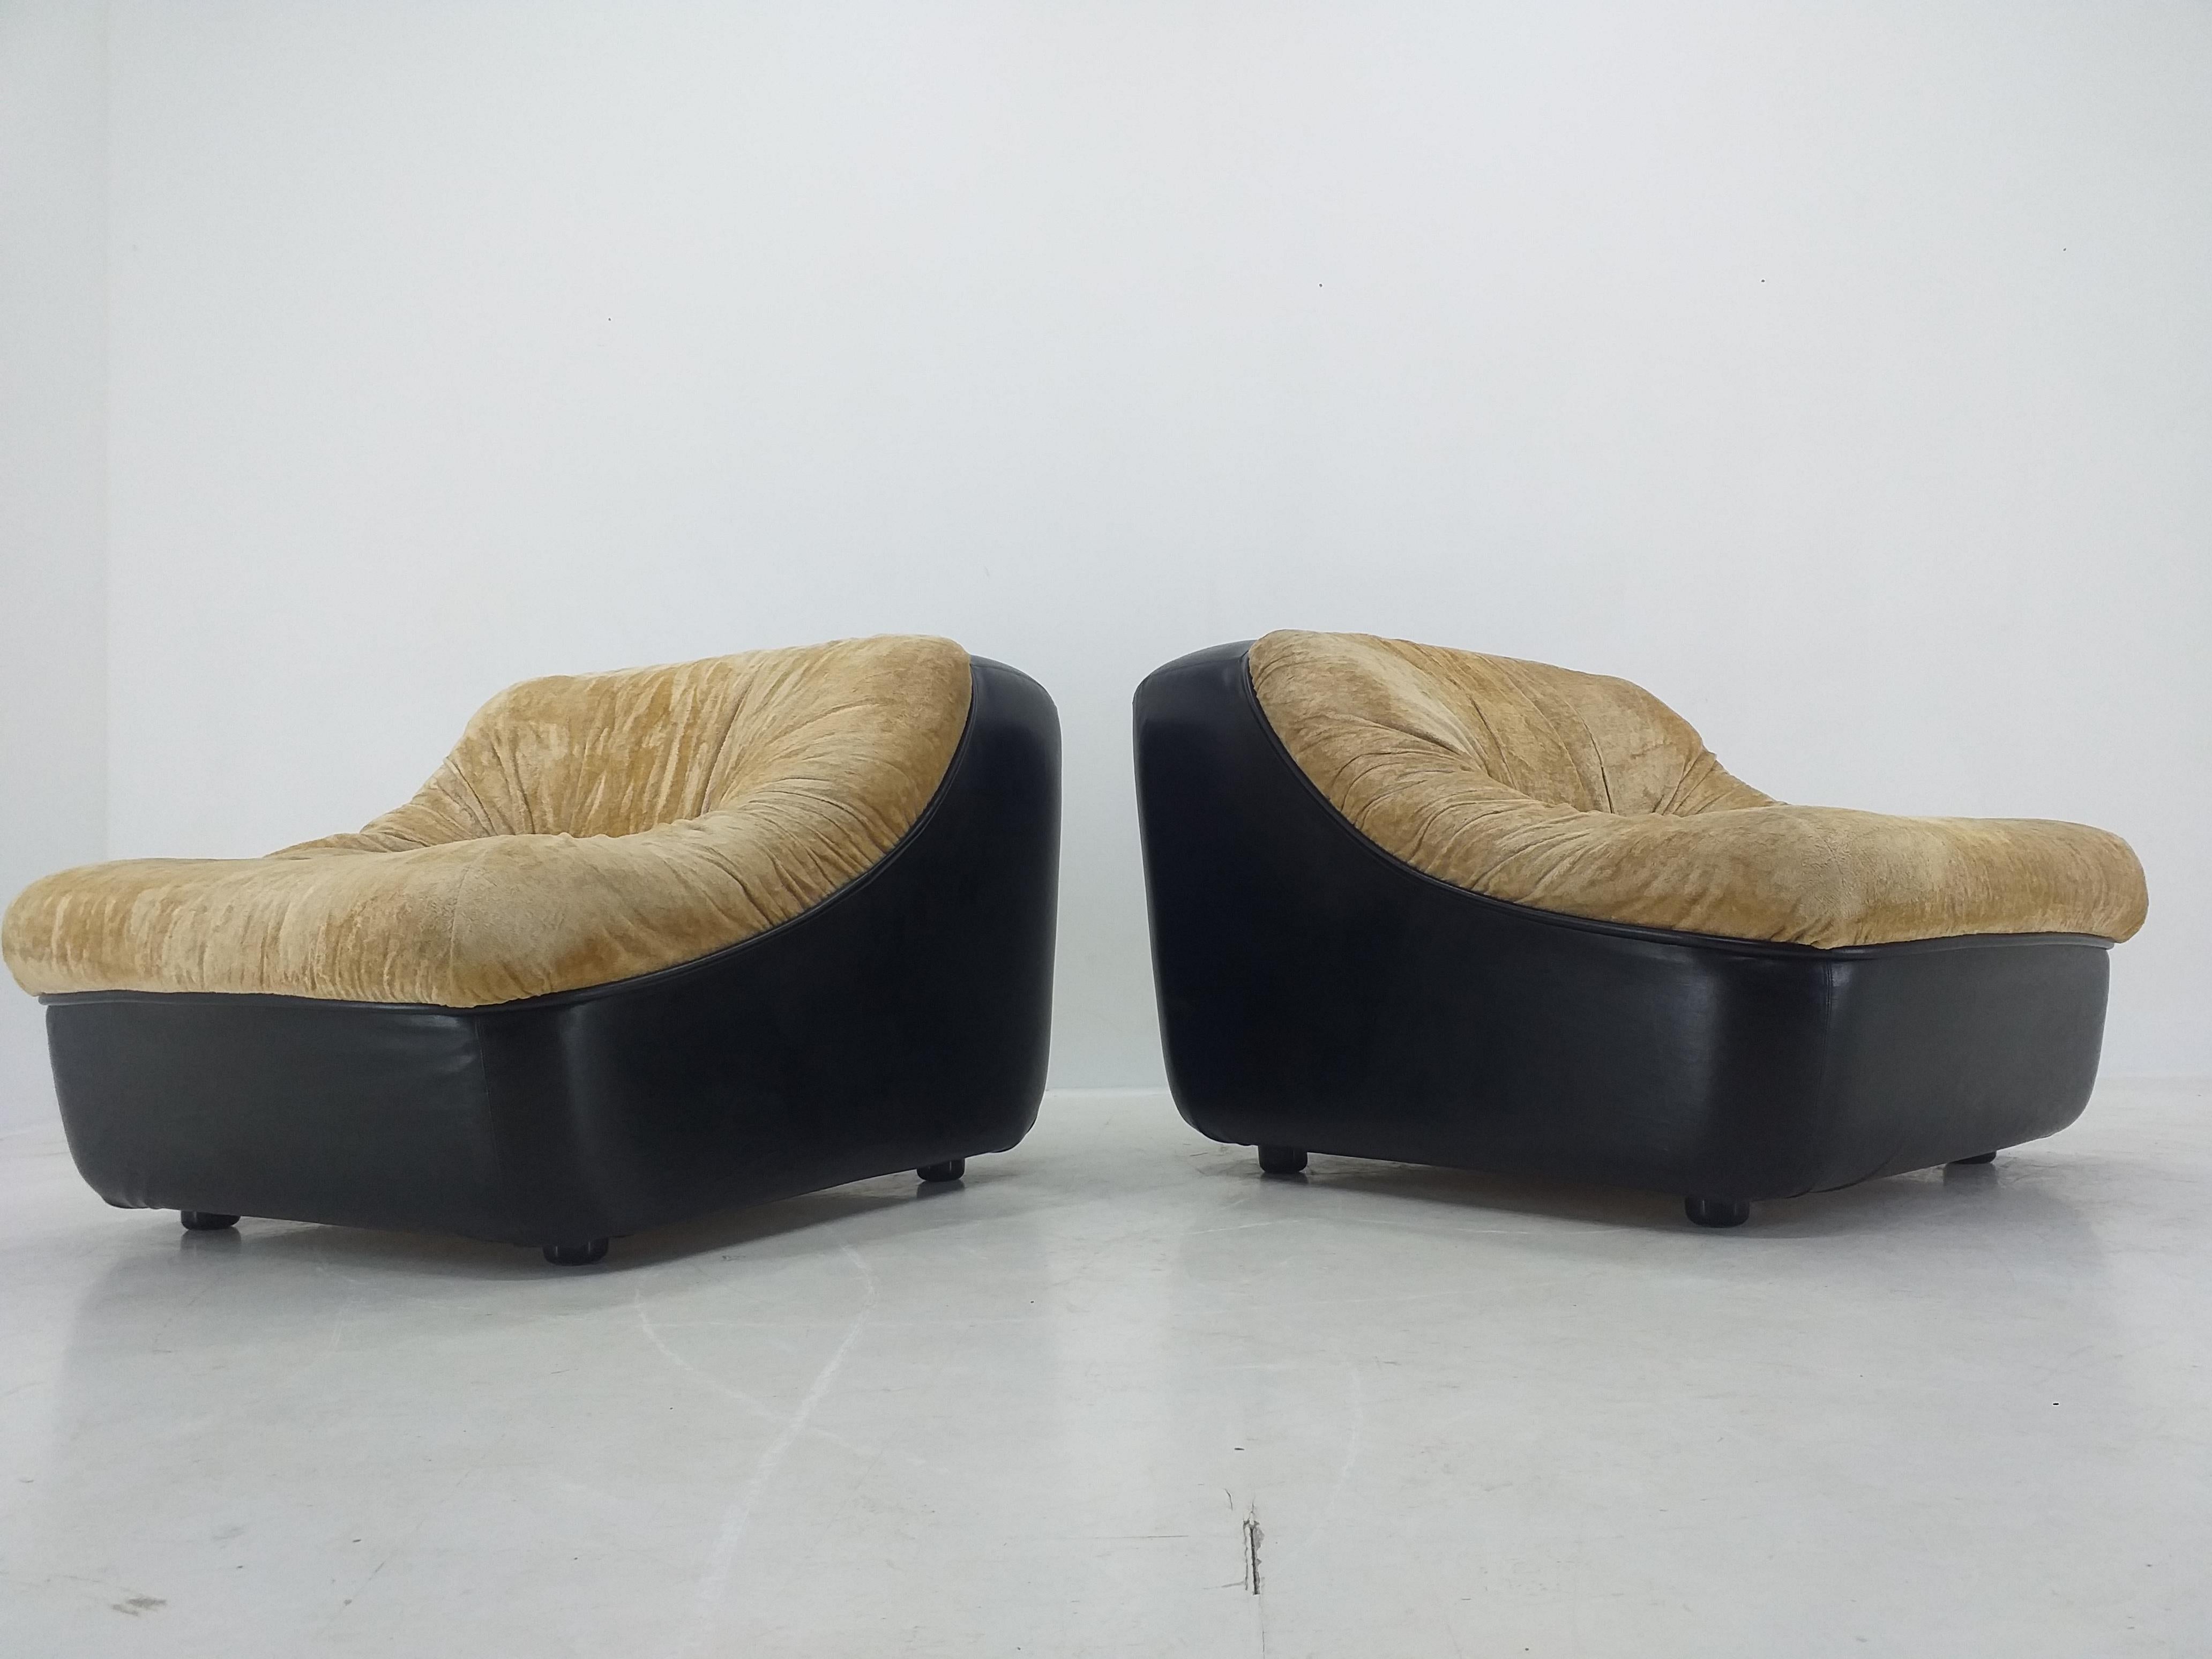 Pair of Midcentury Lounge Chairs, Italy, 1970s For Sale 2